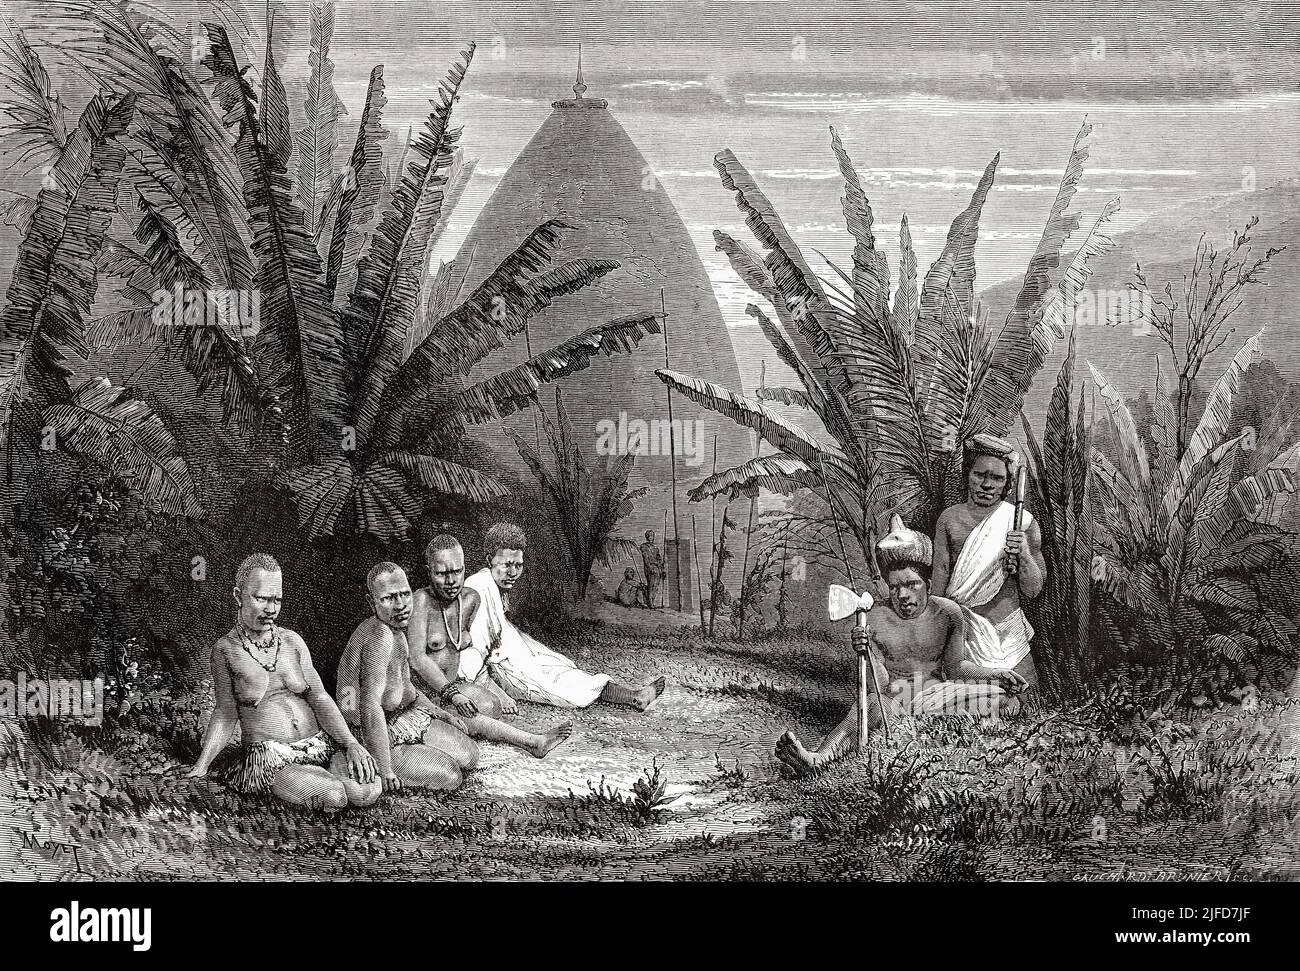 Tribal chief dwelling near Canala, New Caledonia. Journey to New Caledonia by Jules Garnier 1863-1866 from Le Tour du Monde 1867 Stock Photo